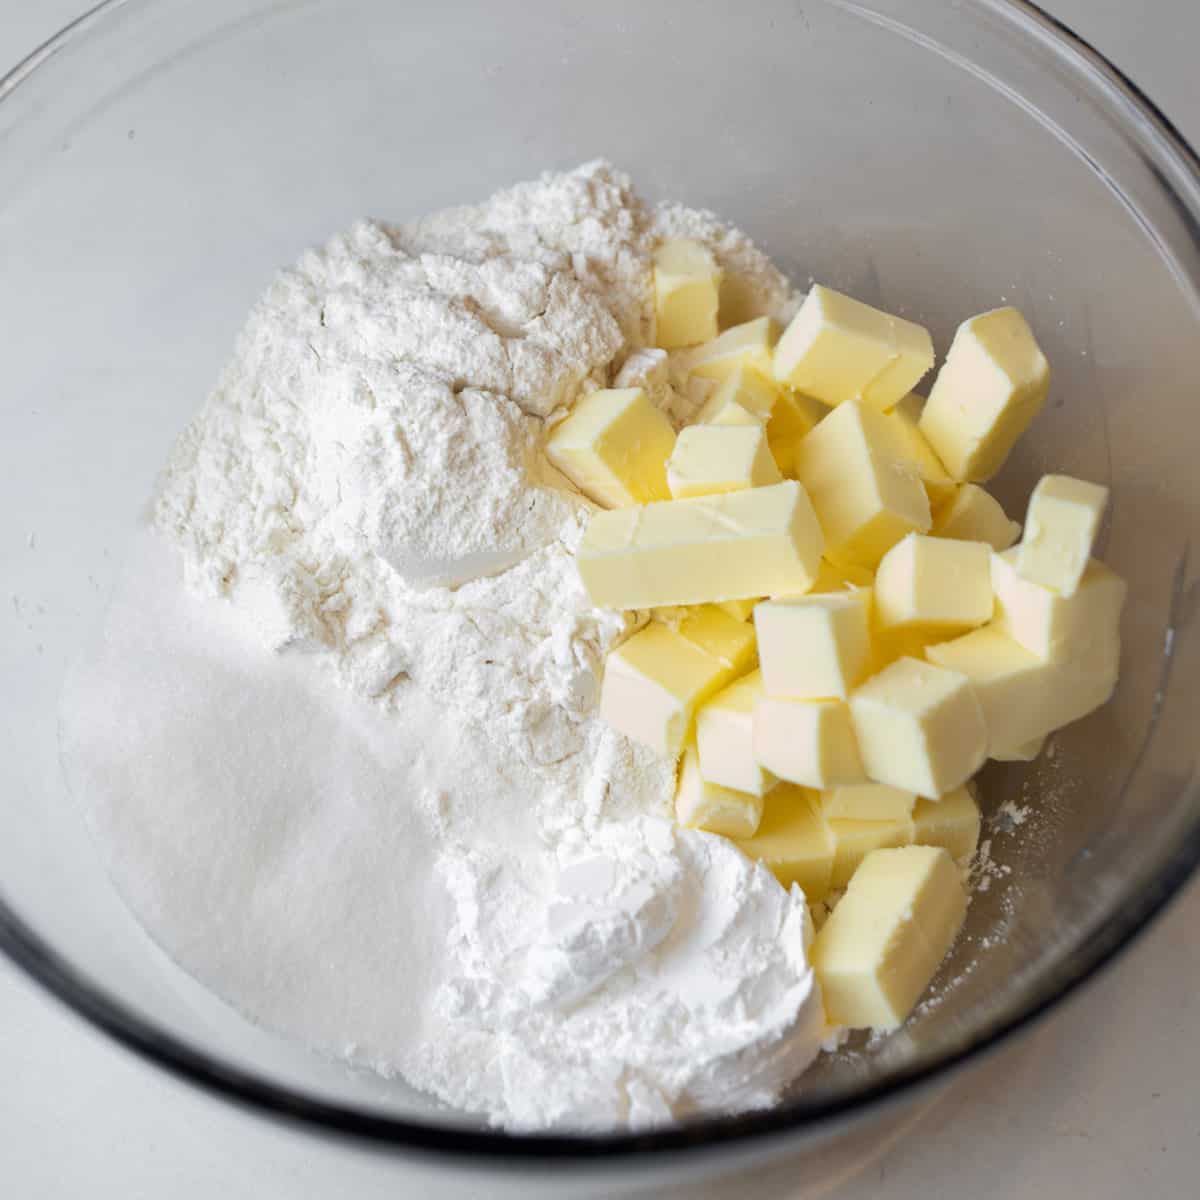 Flour and butter in a glass bowl.